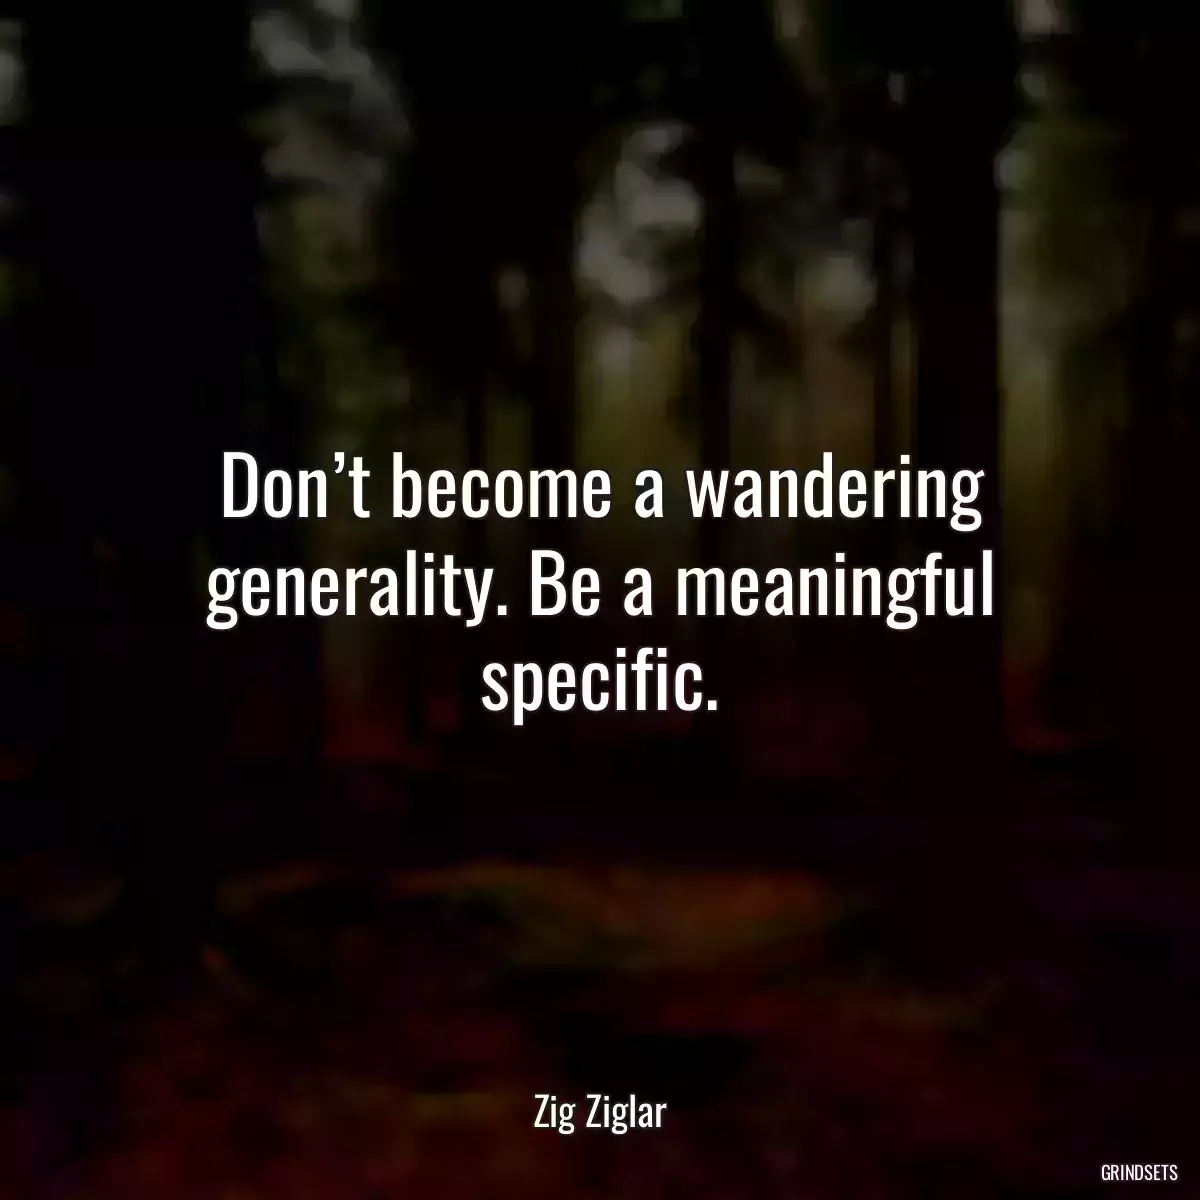 Don’t become a wandering generality. Be a meaningful specific.